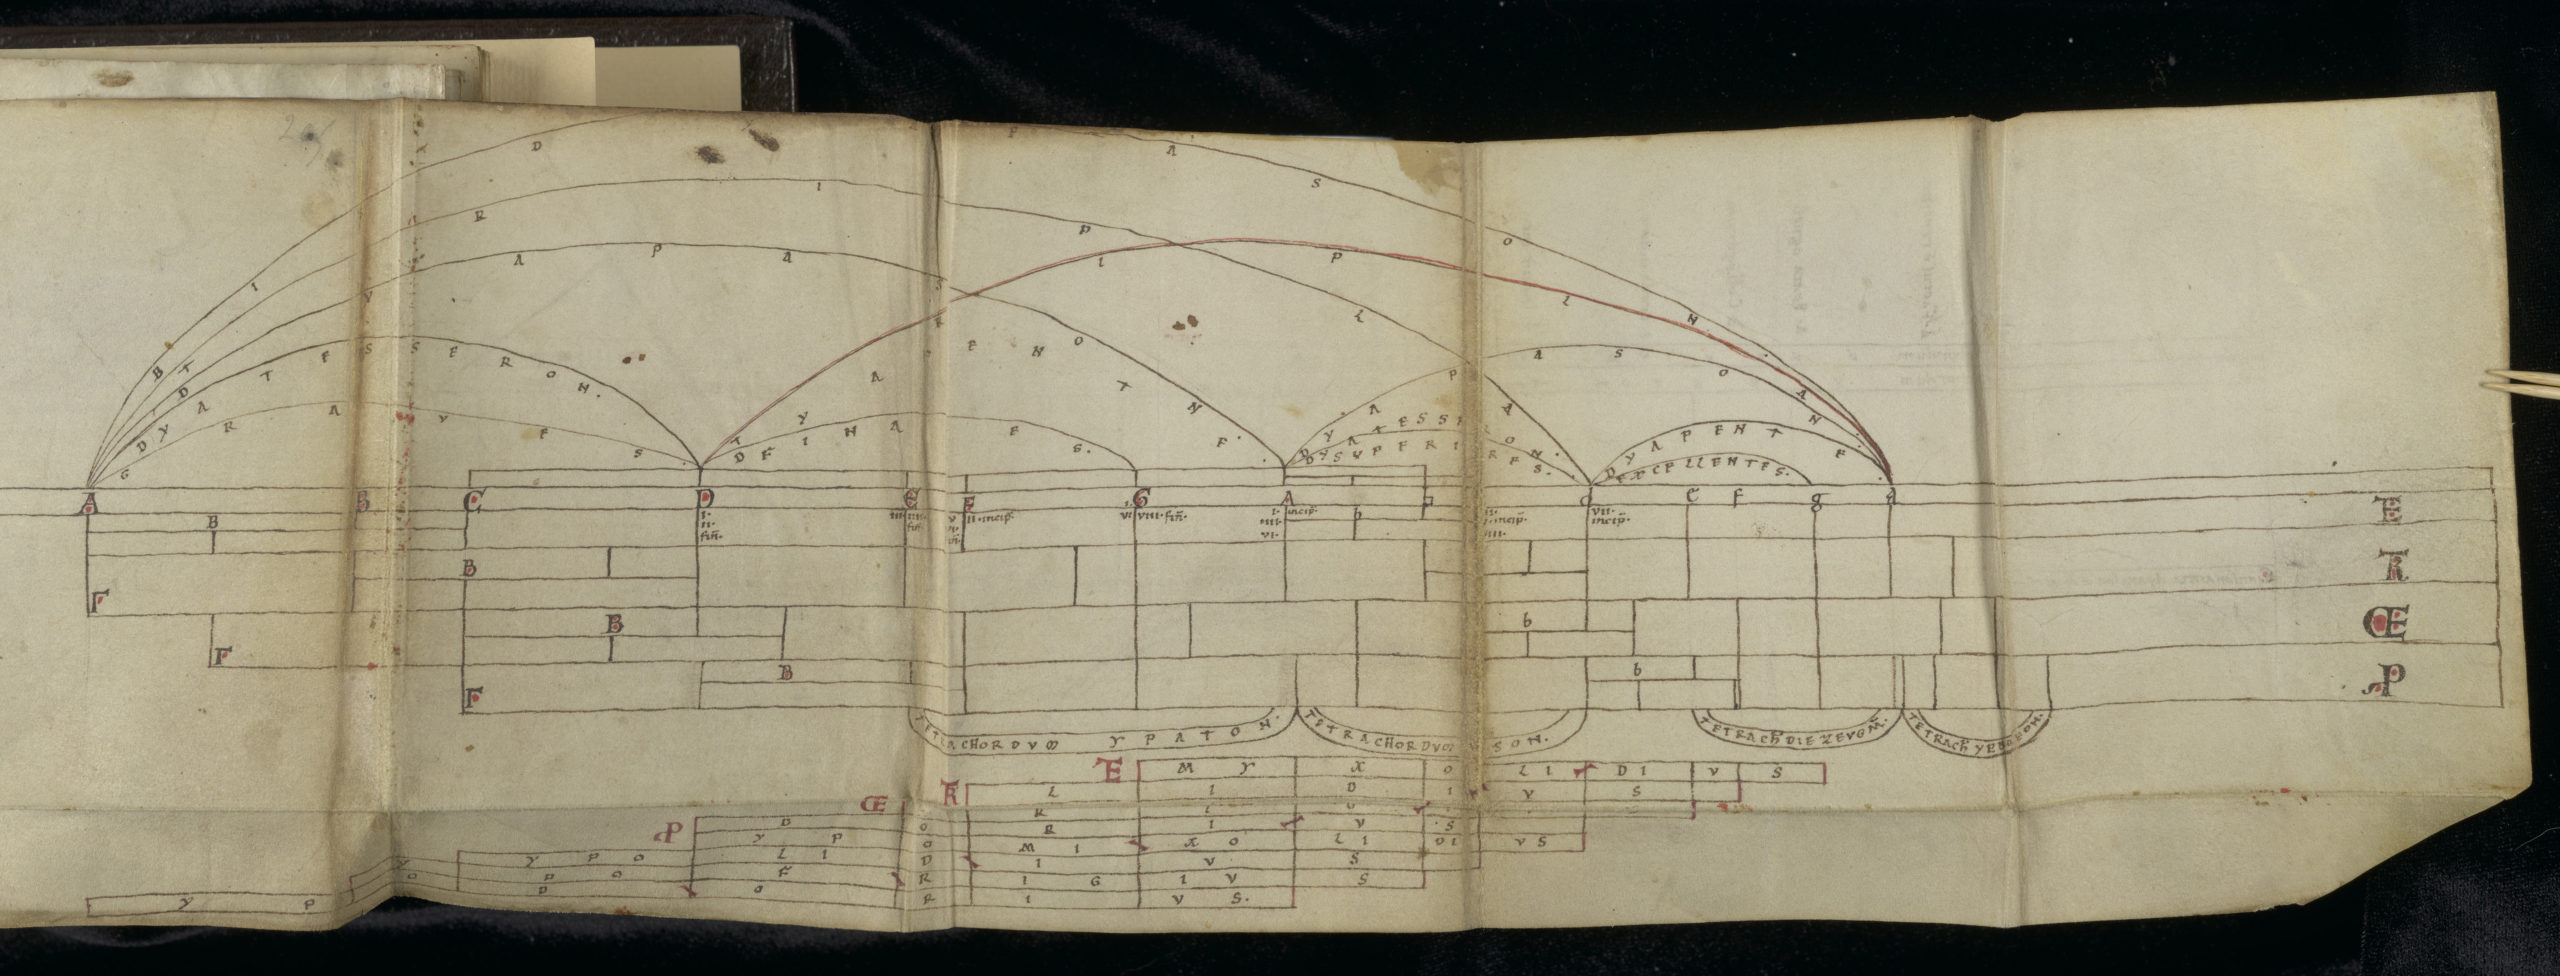 Wilhelm, Musica, table of tetrachords (page 205)